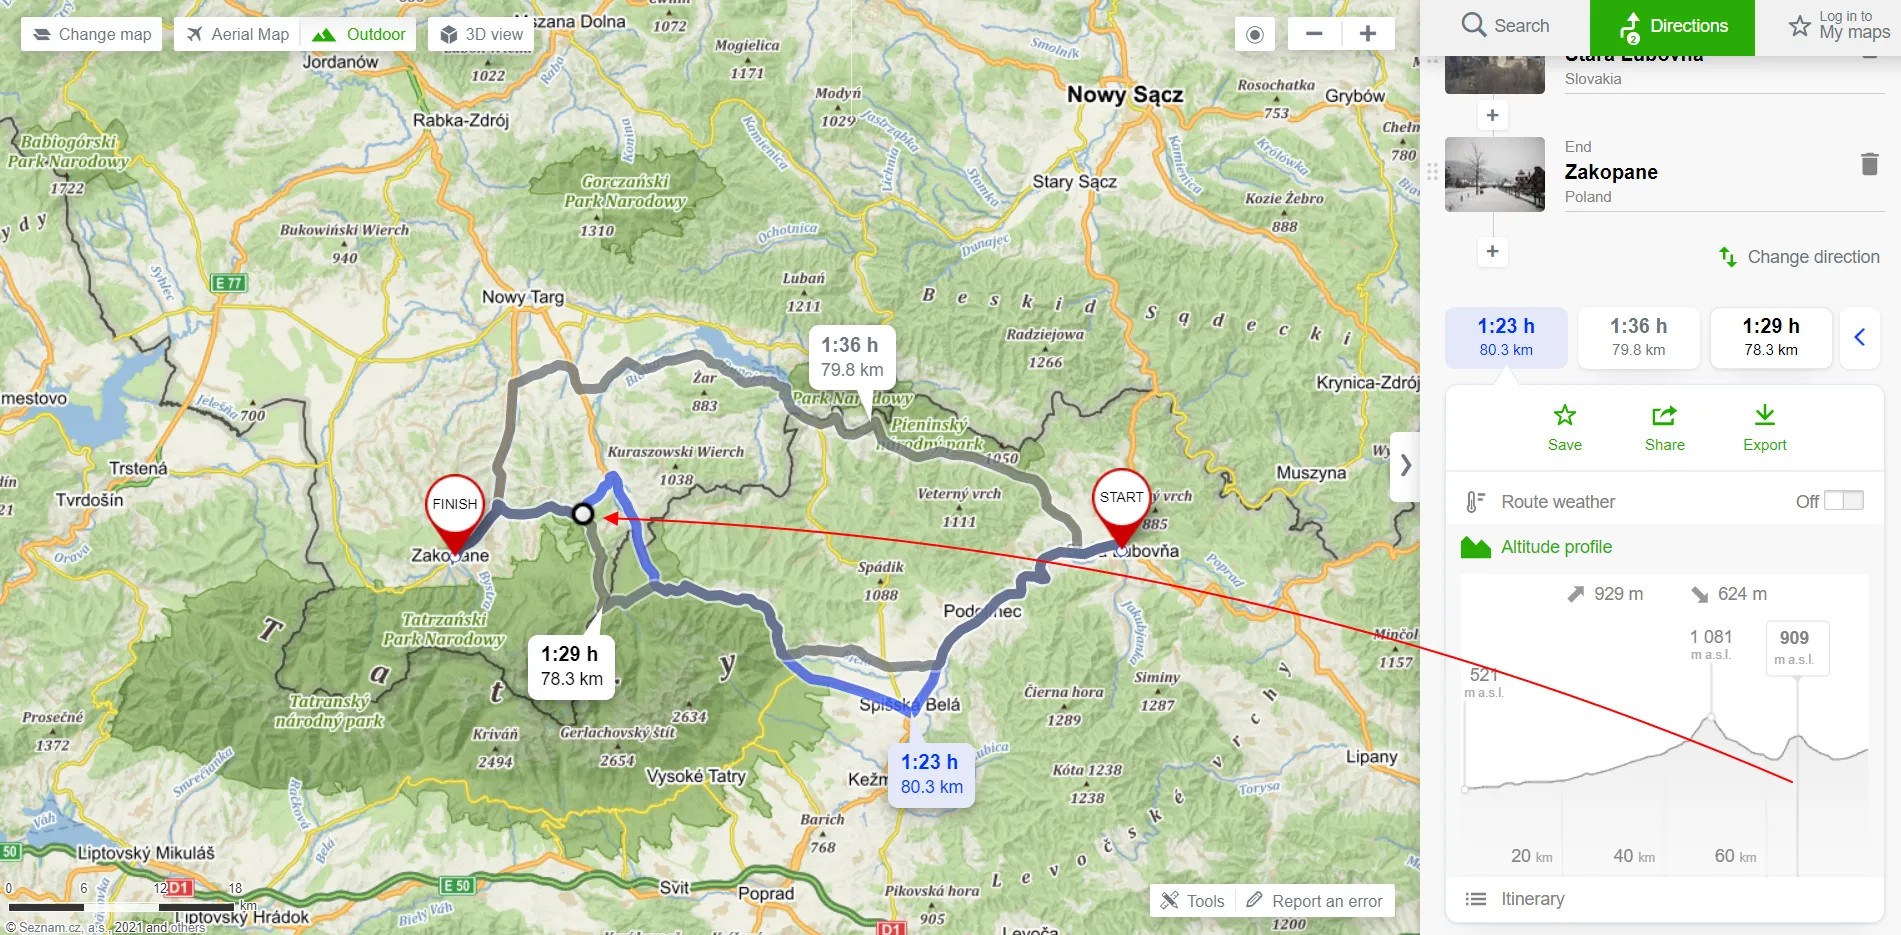 Mapy.cz terrain profile for route calculated by car